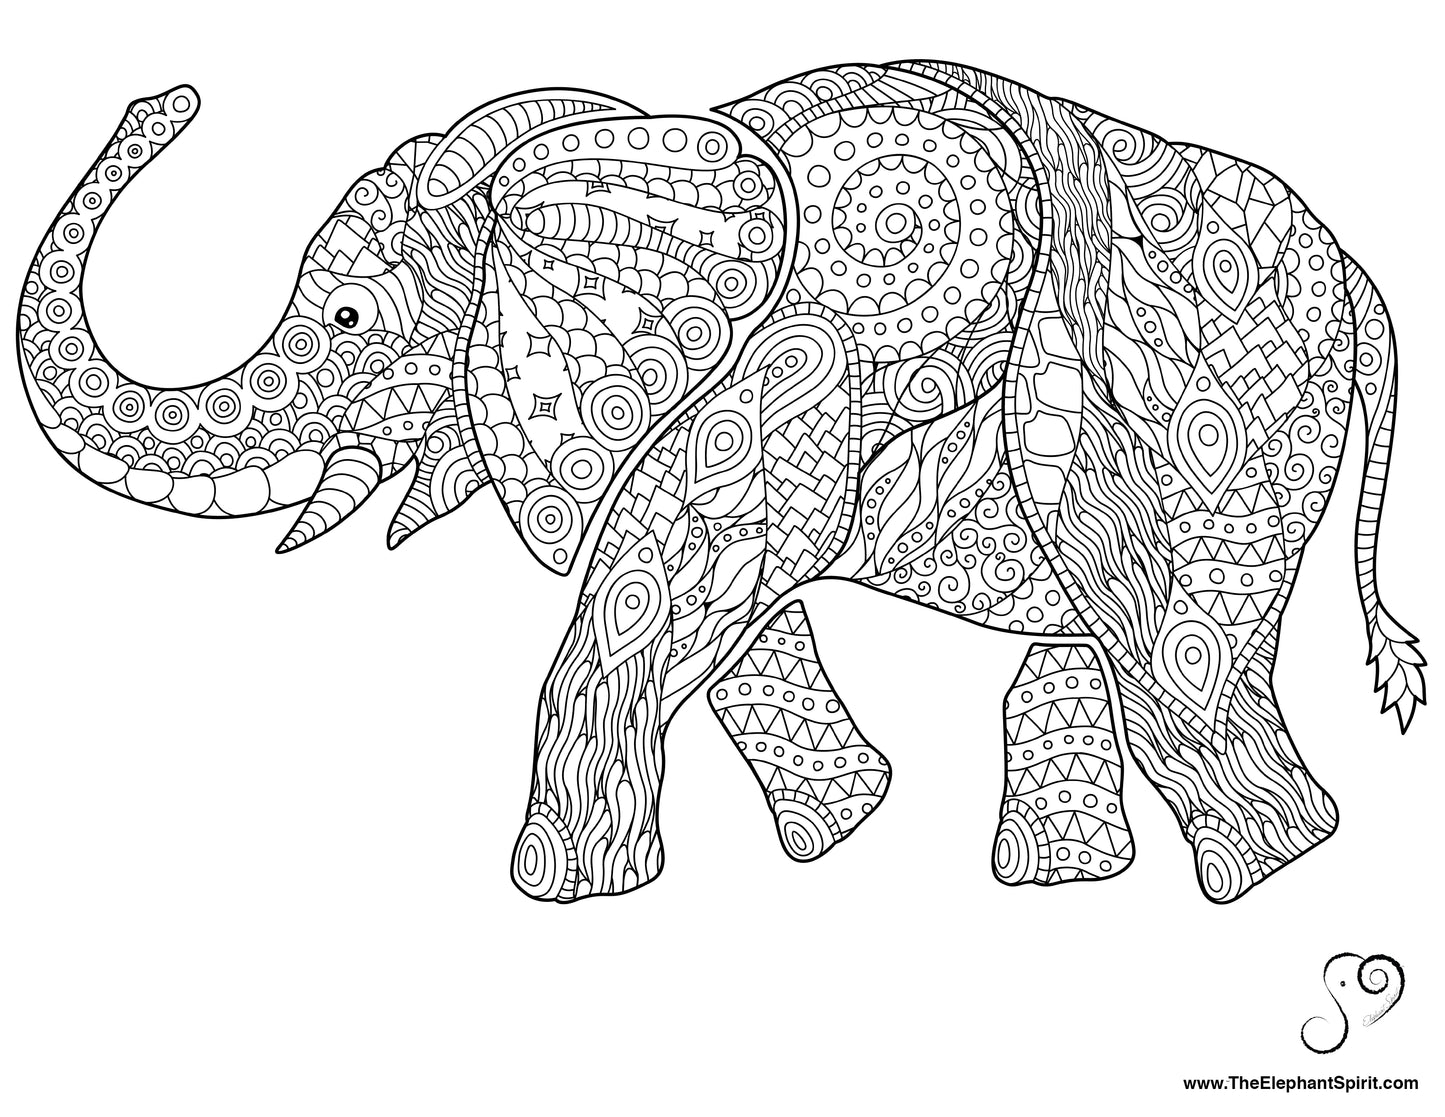 FREE Coloring Page 09-15